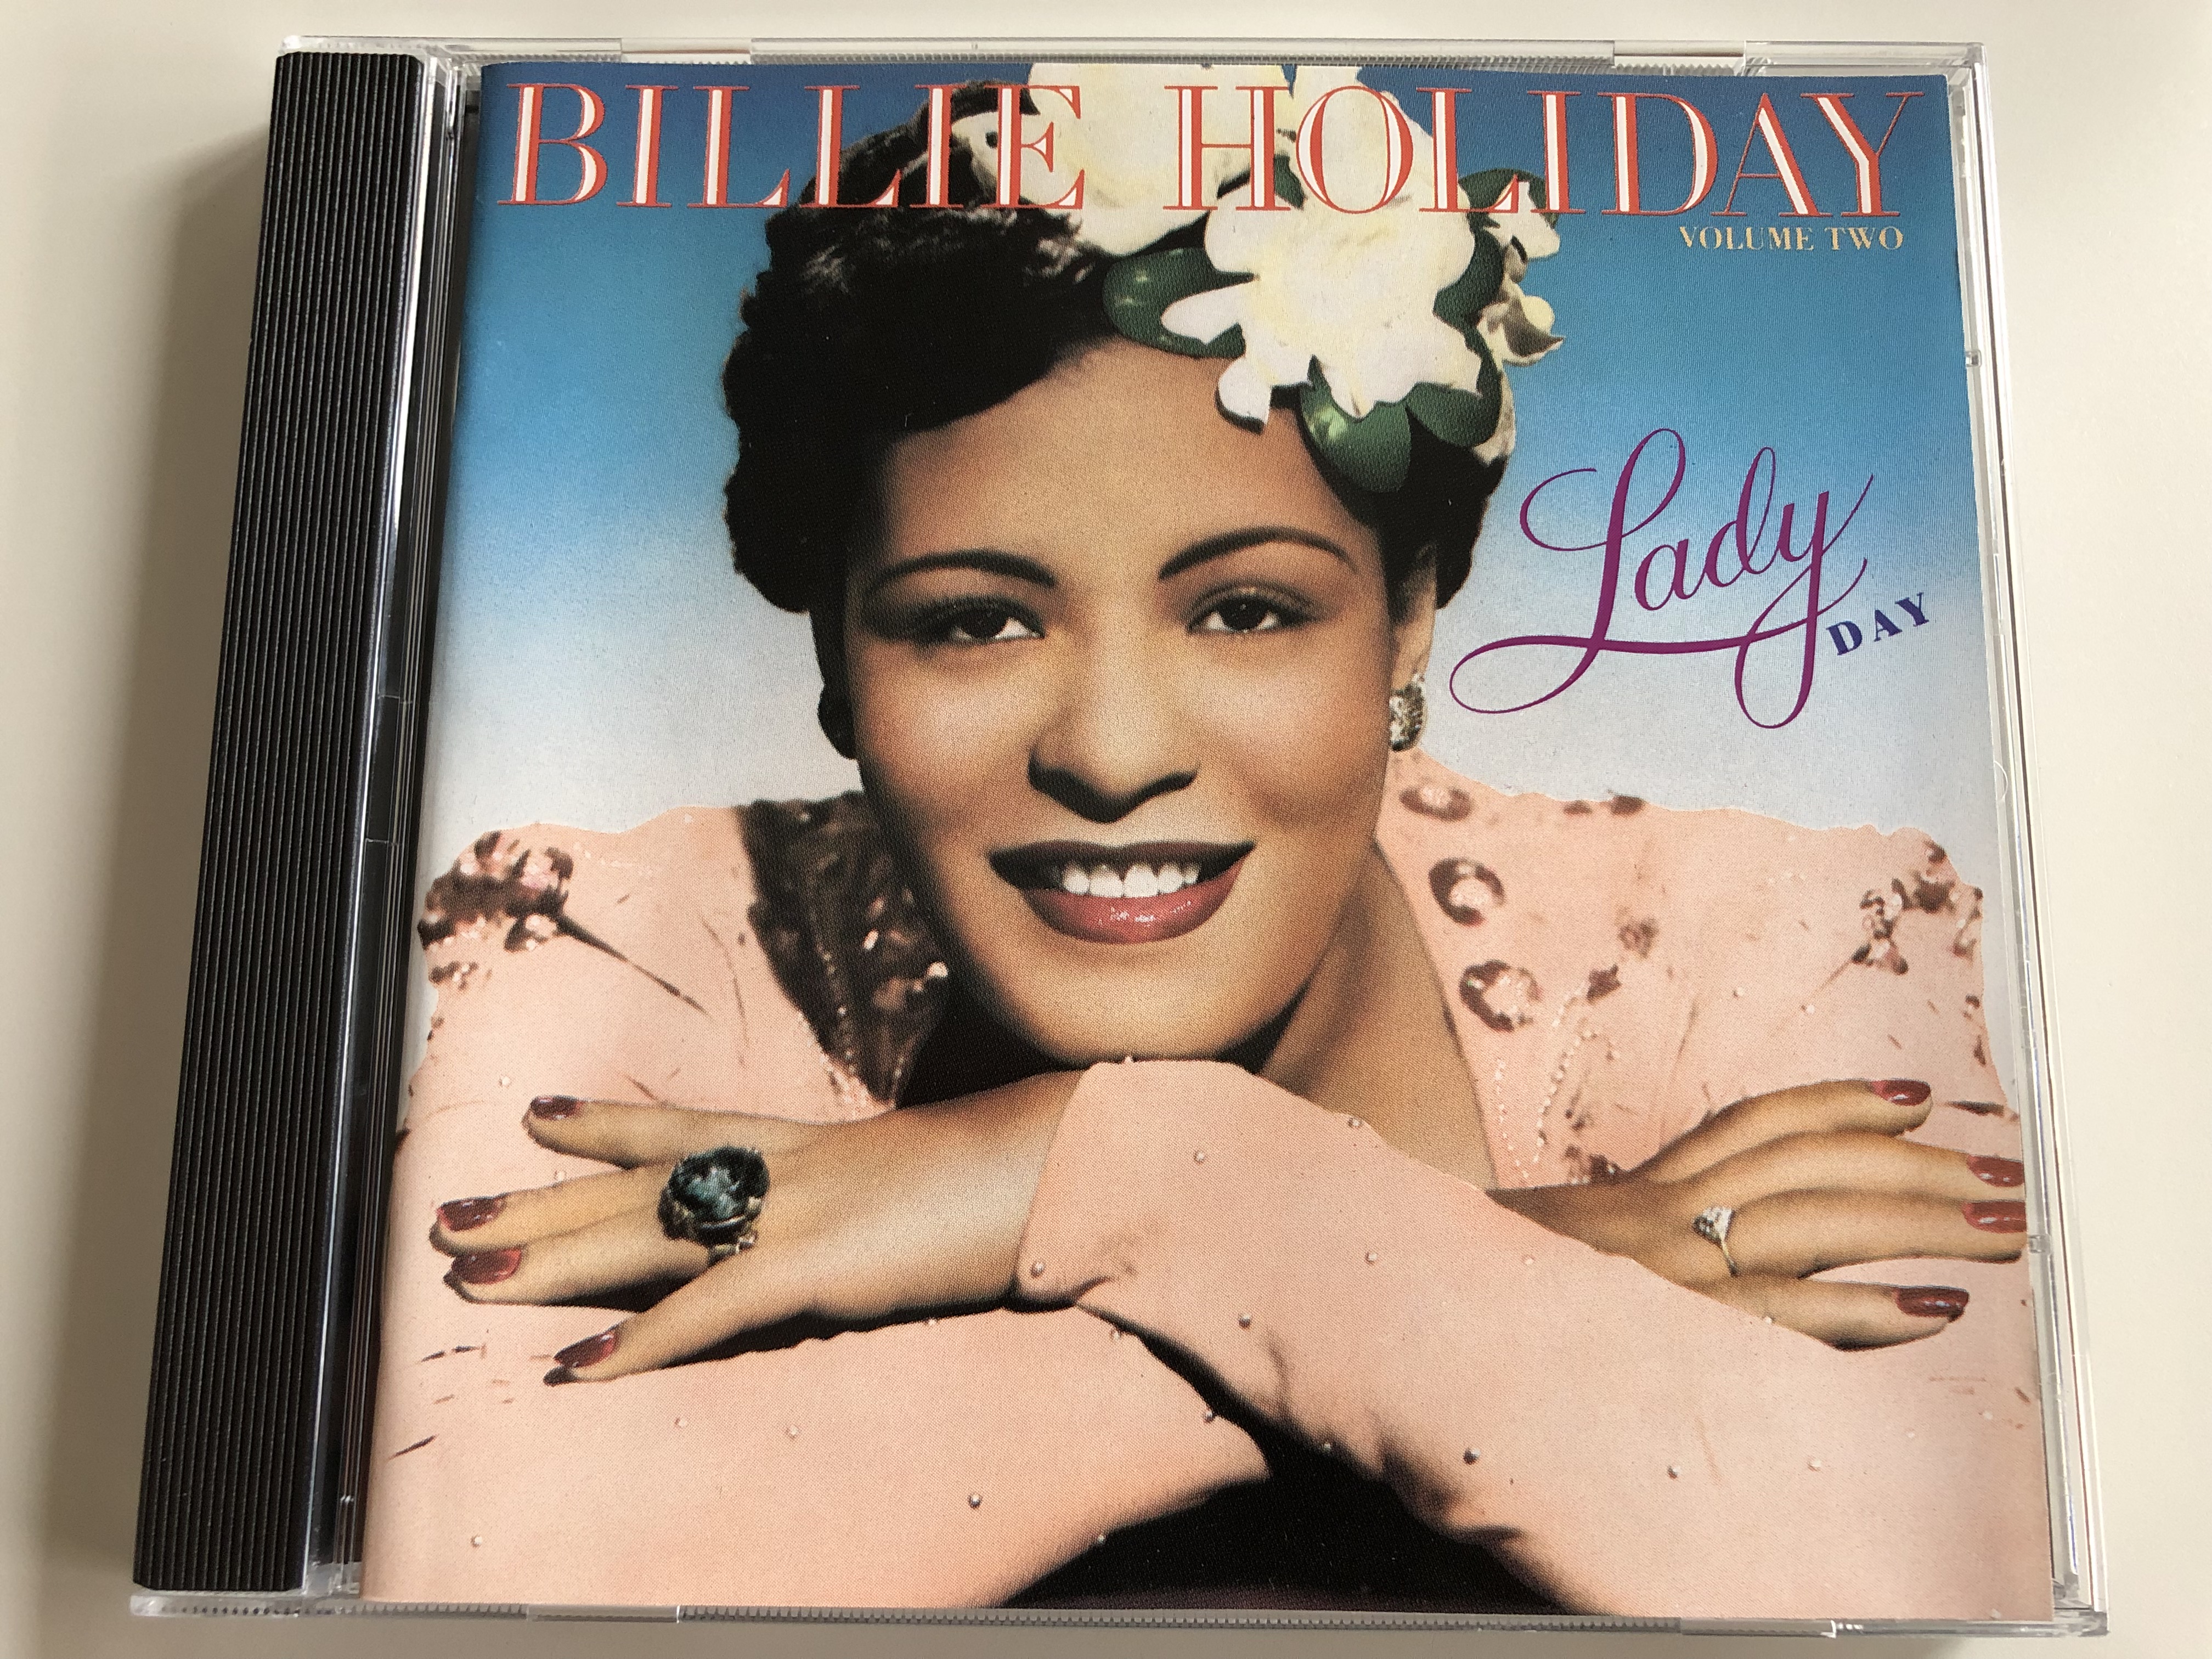 billie-holiday-lady-day-volume-two-mca-records-audio-cd-1988-mcd-31322-1-.jpg